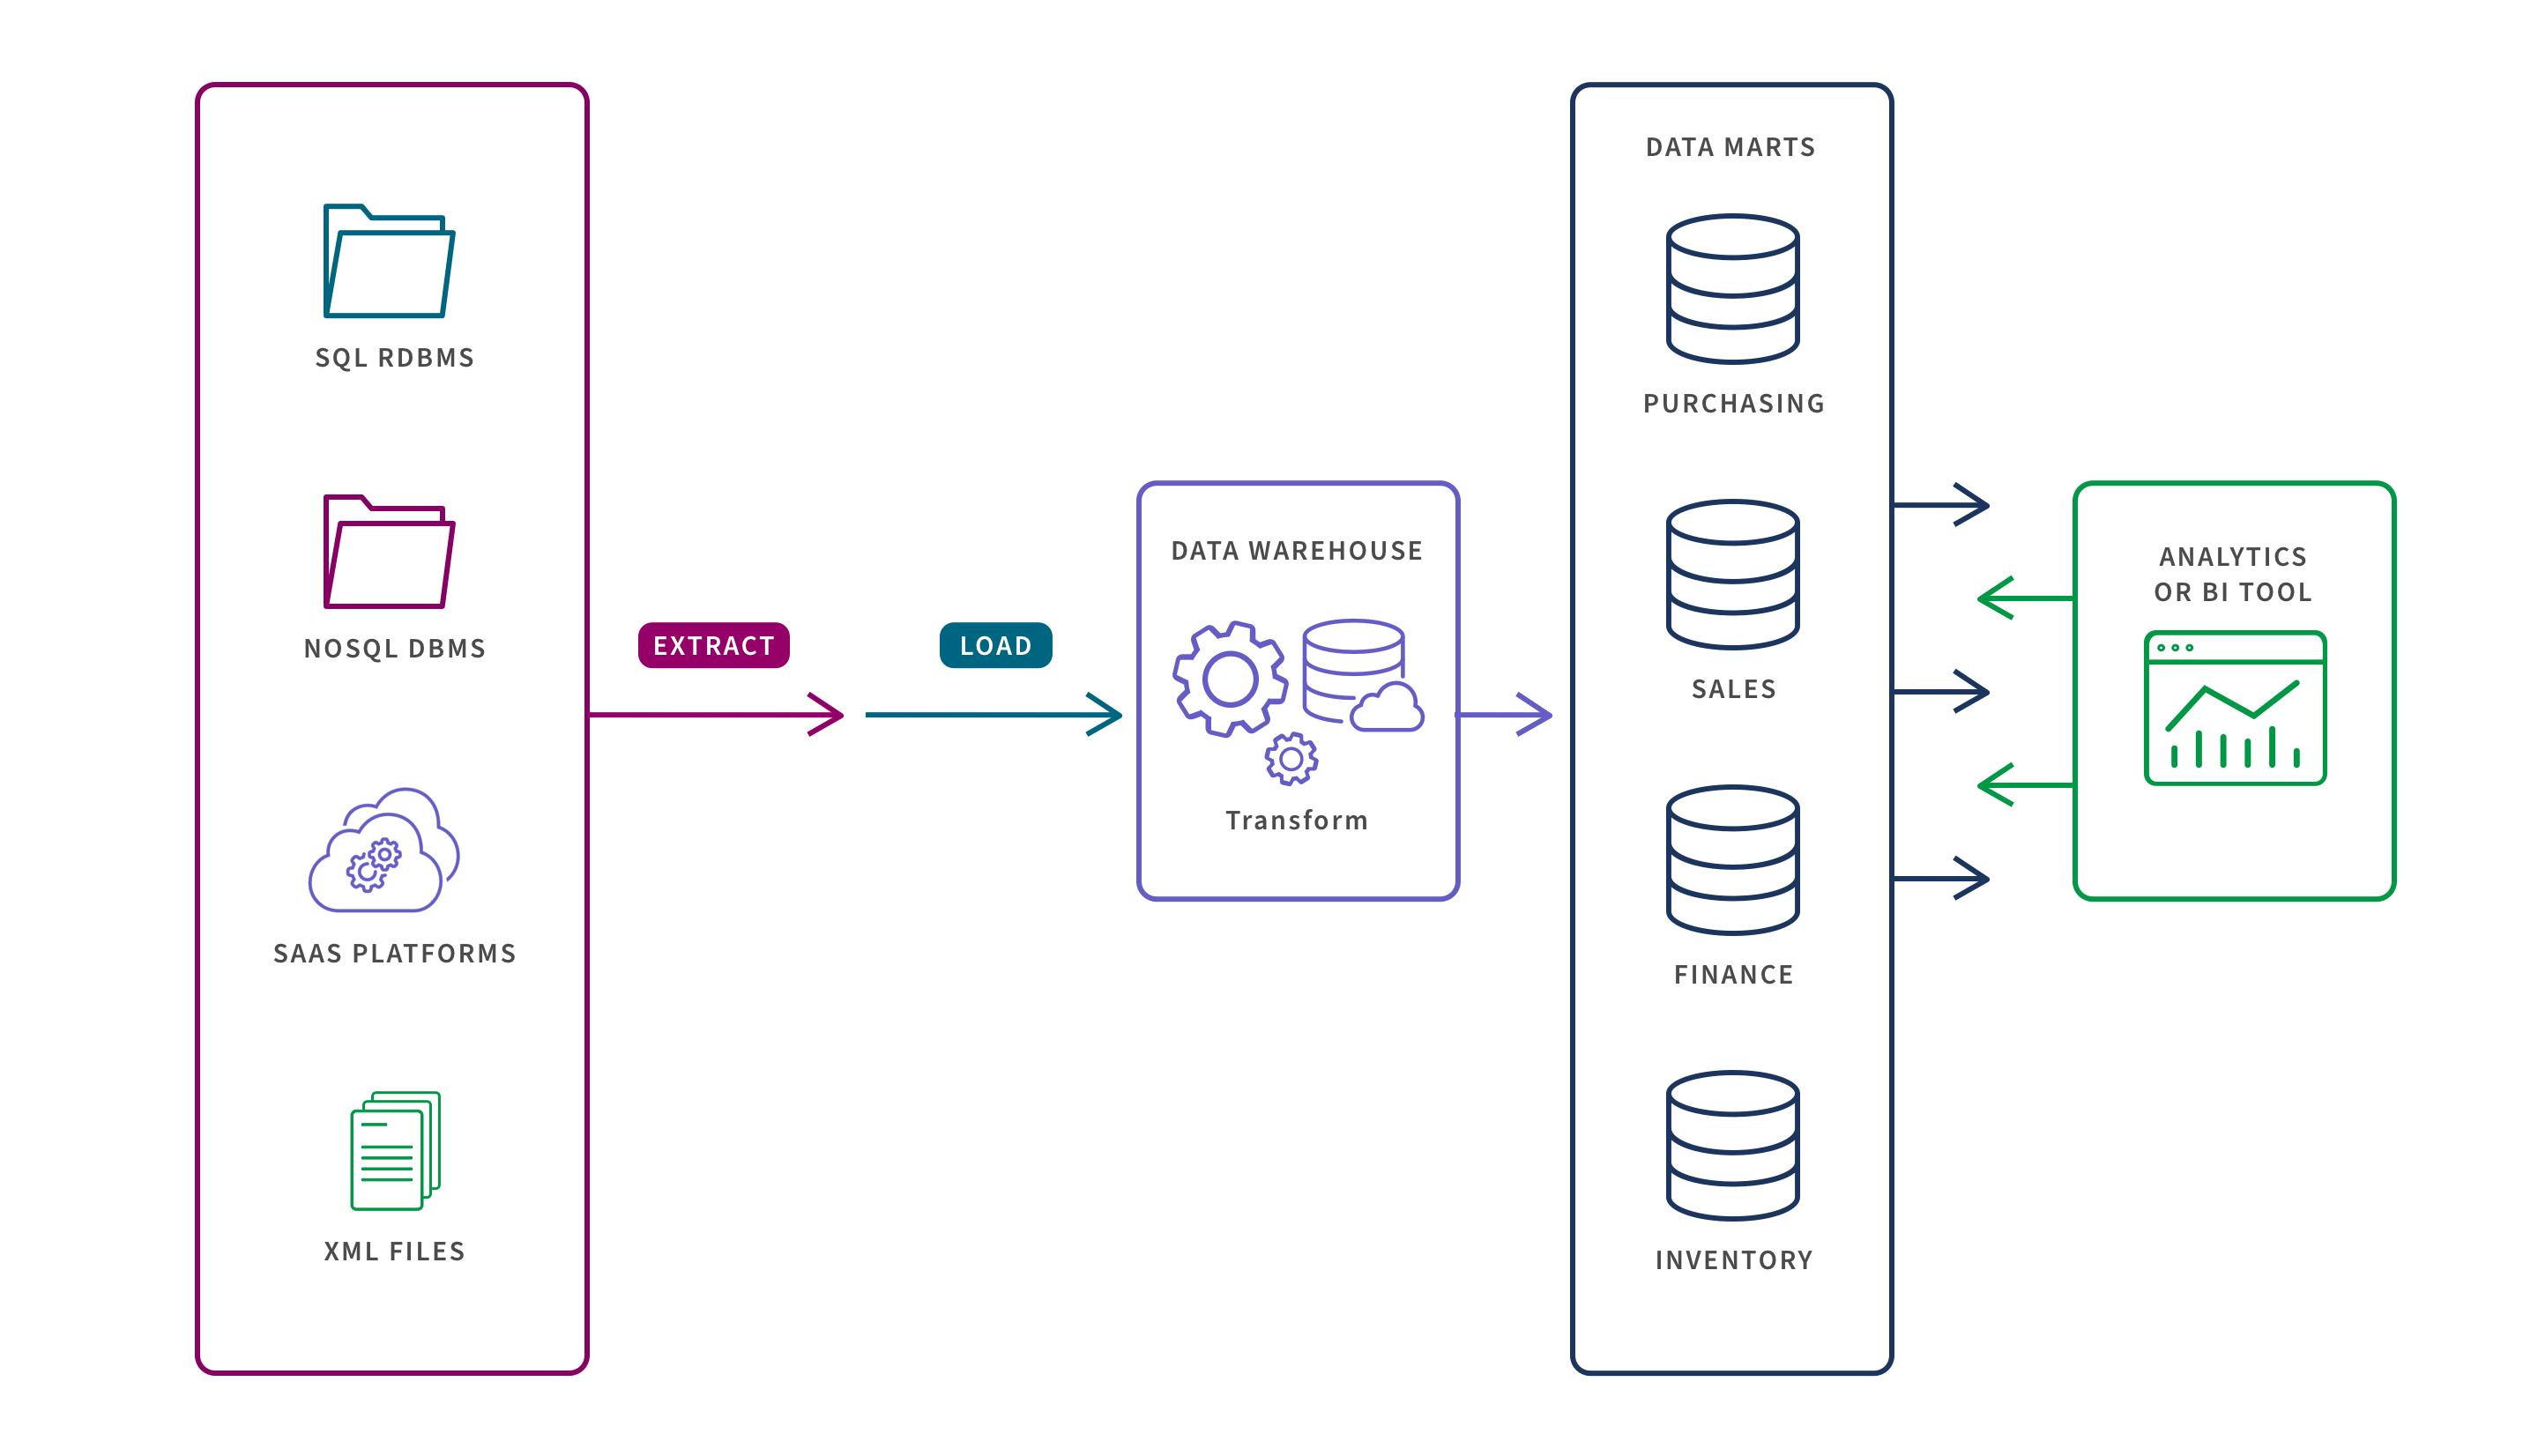 Diagram showing how raw data is stored in a Data Warehouse for use in Data Marts tied to Analytics or BI Tools.